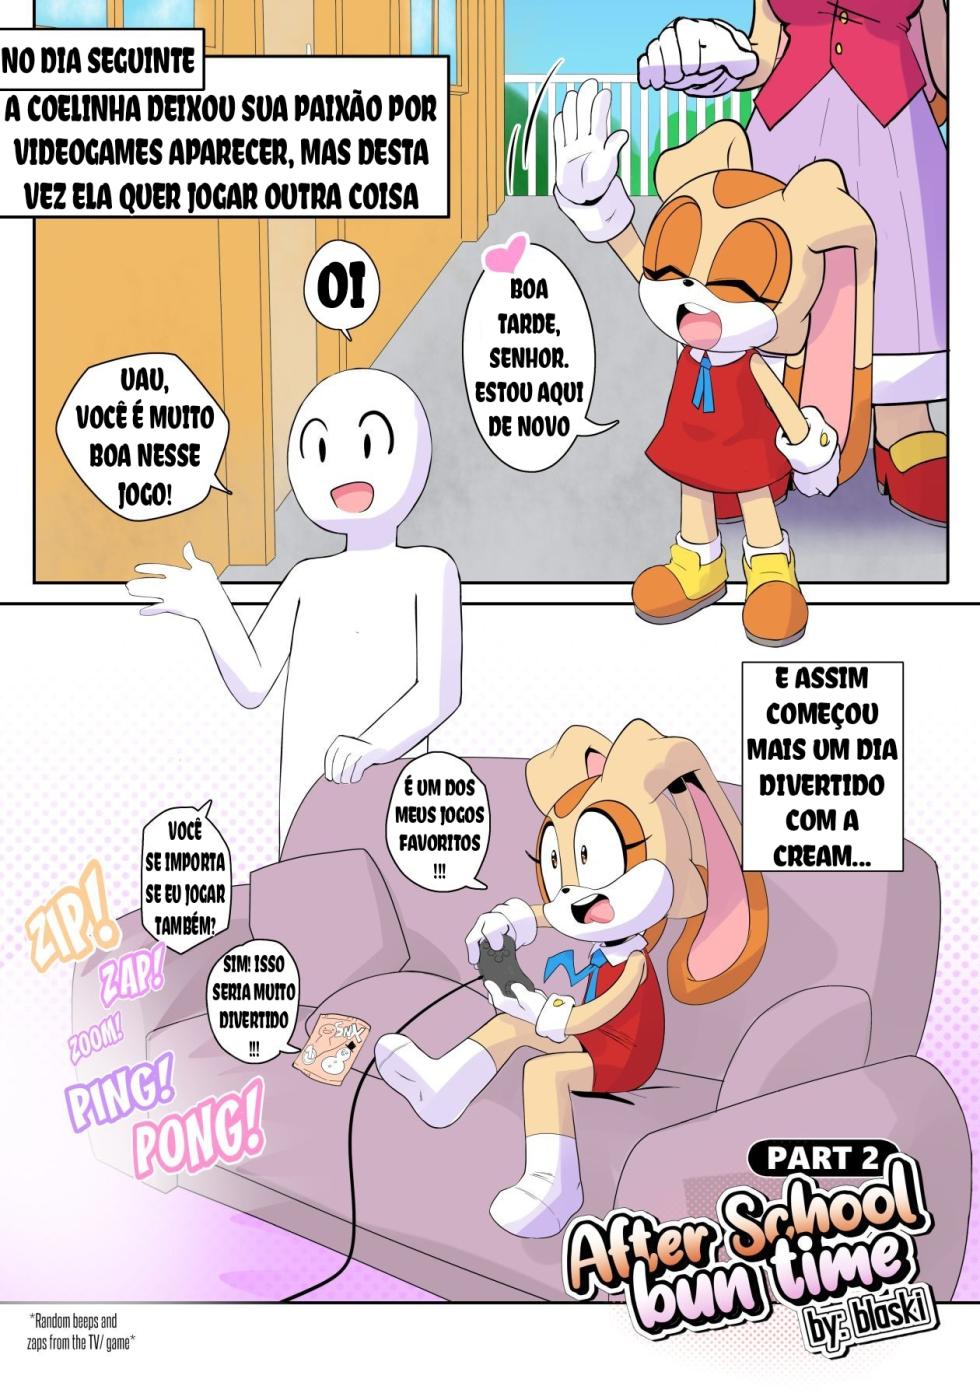 After School Bun Time (Sonic the Hedgehog) - Page 21